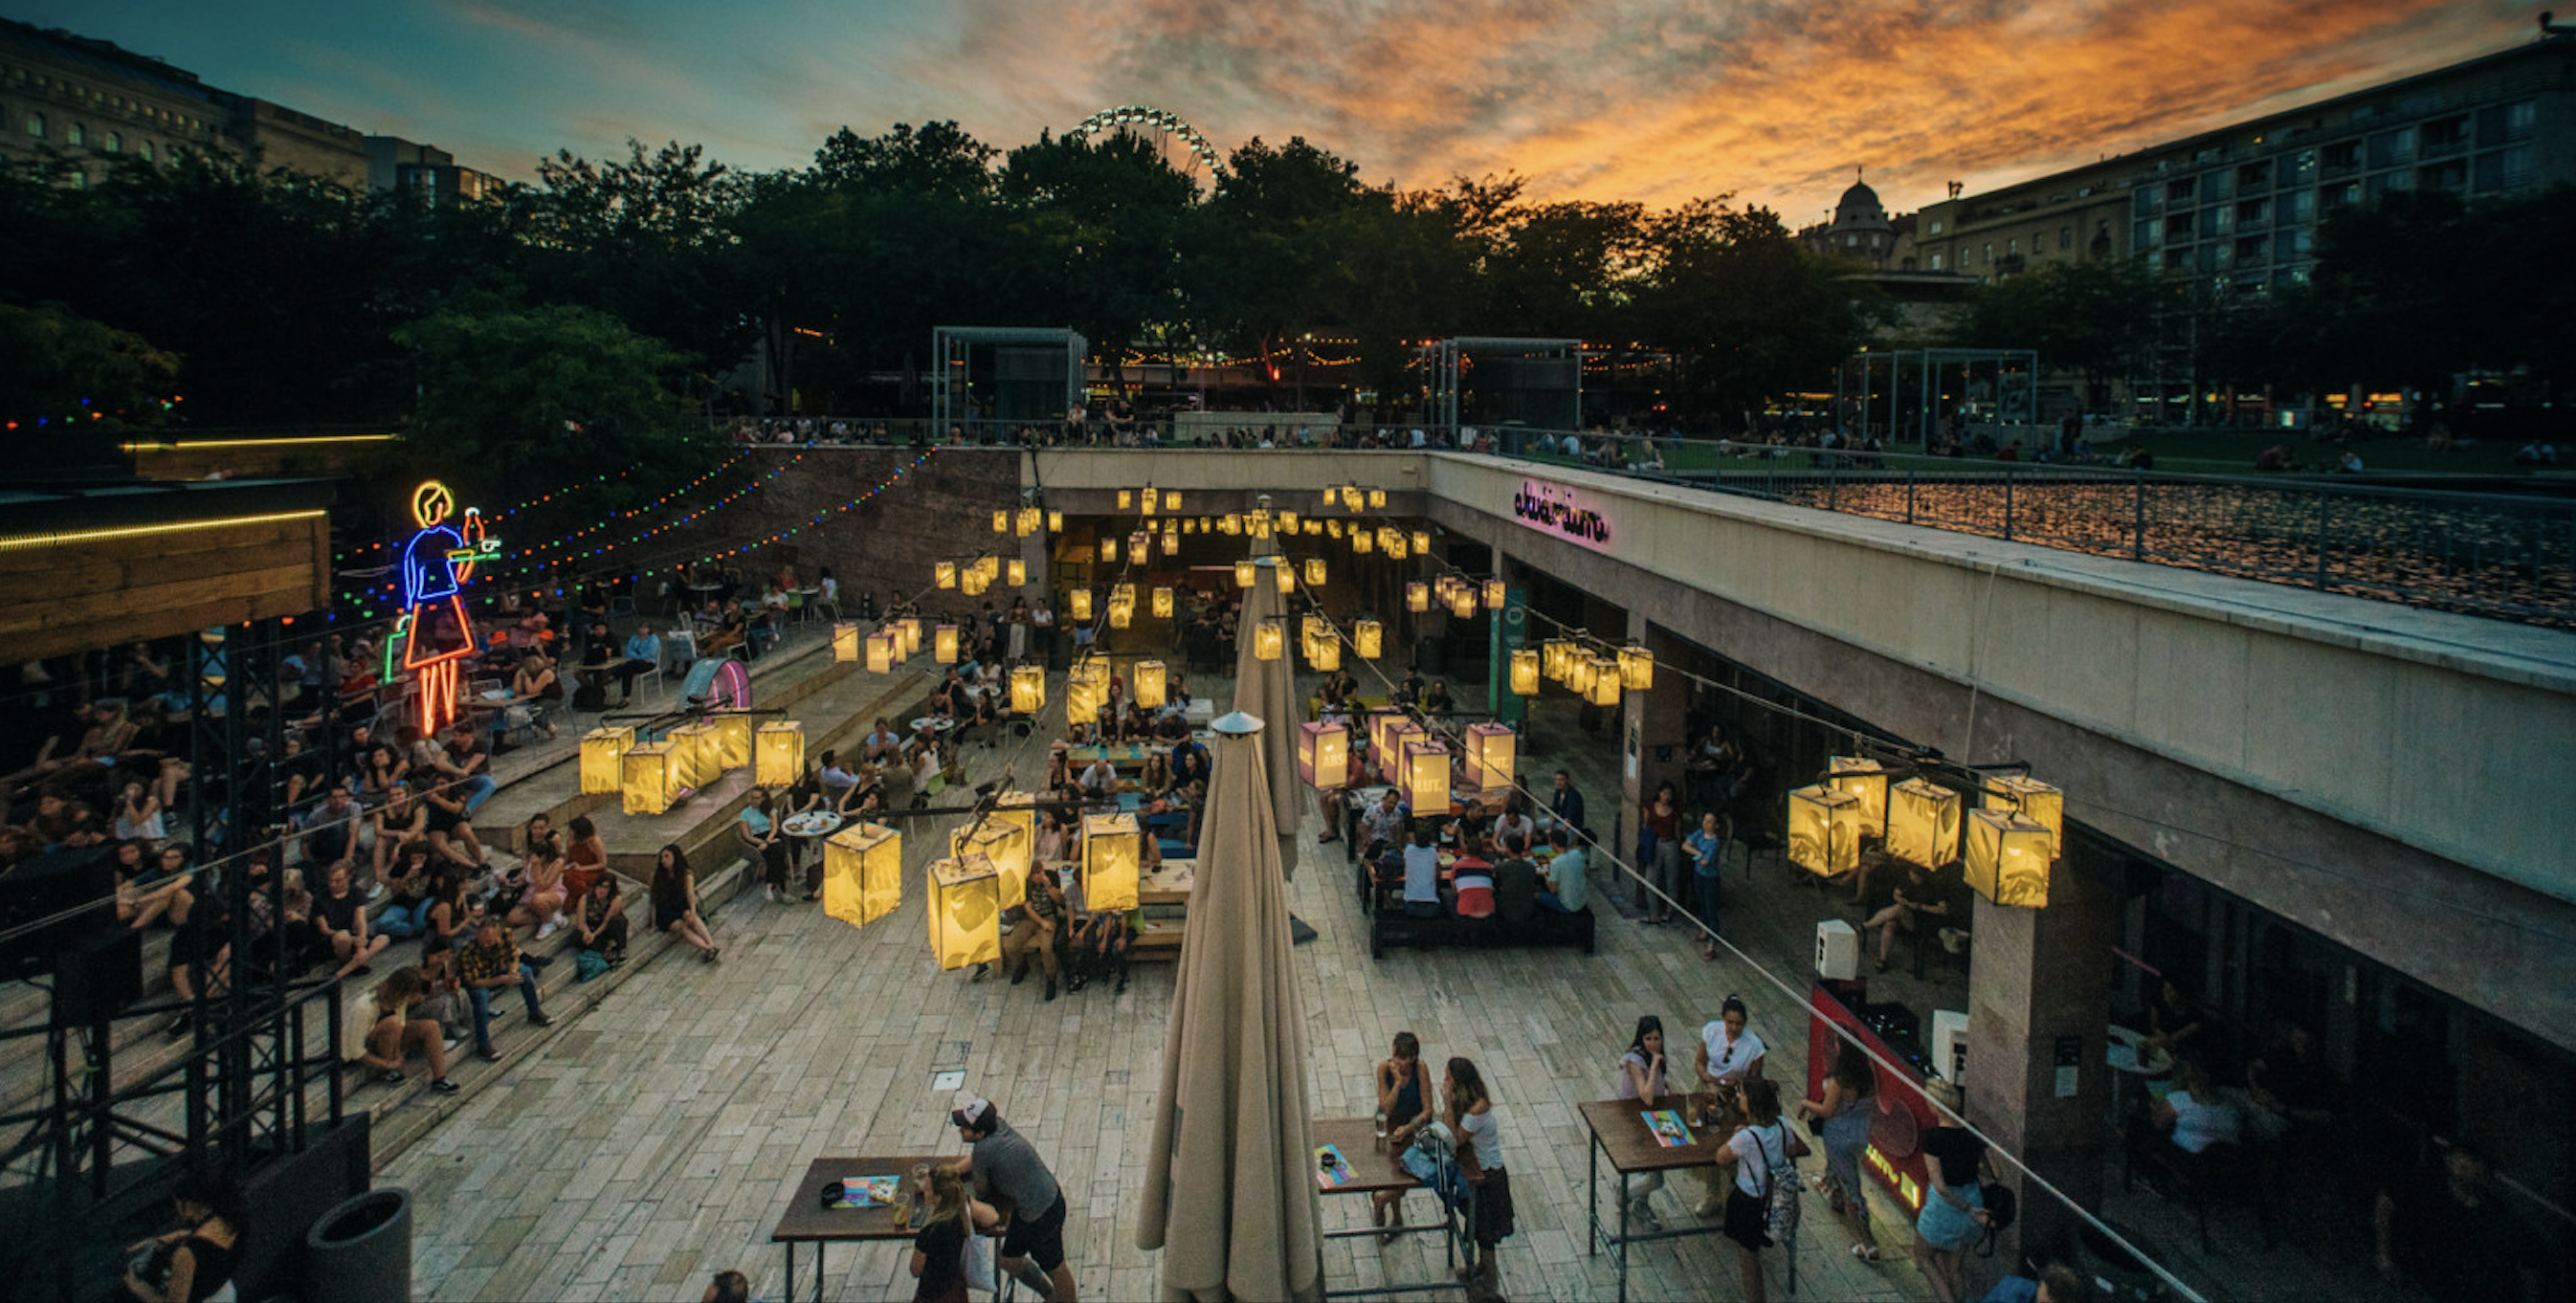 The open-air terrace of Akvárium Klub, one of the greatest concert venues in Budapest